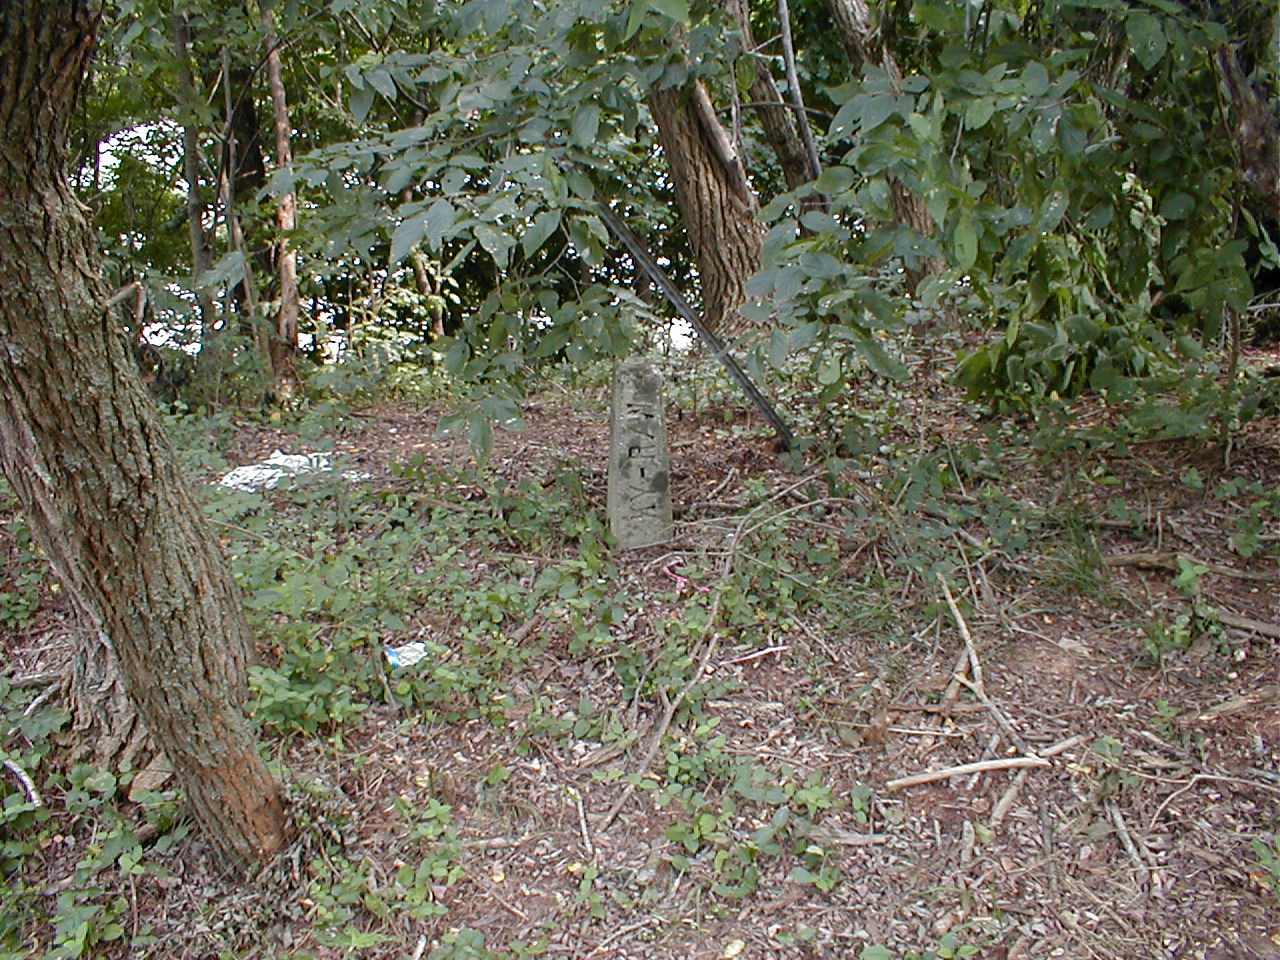 An old Kentucky right of way marker.